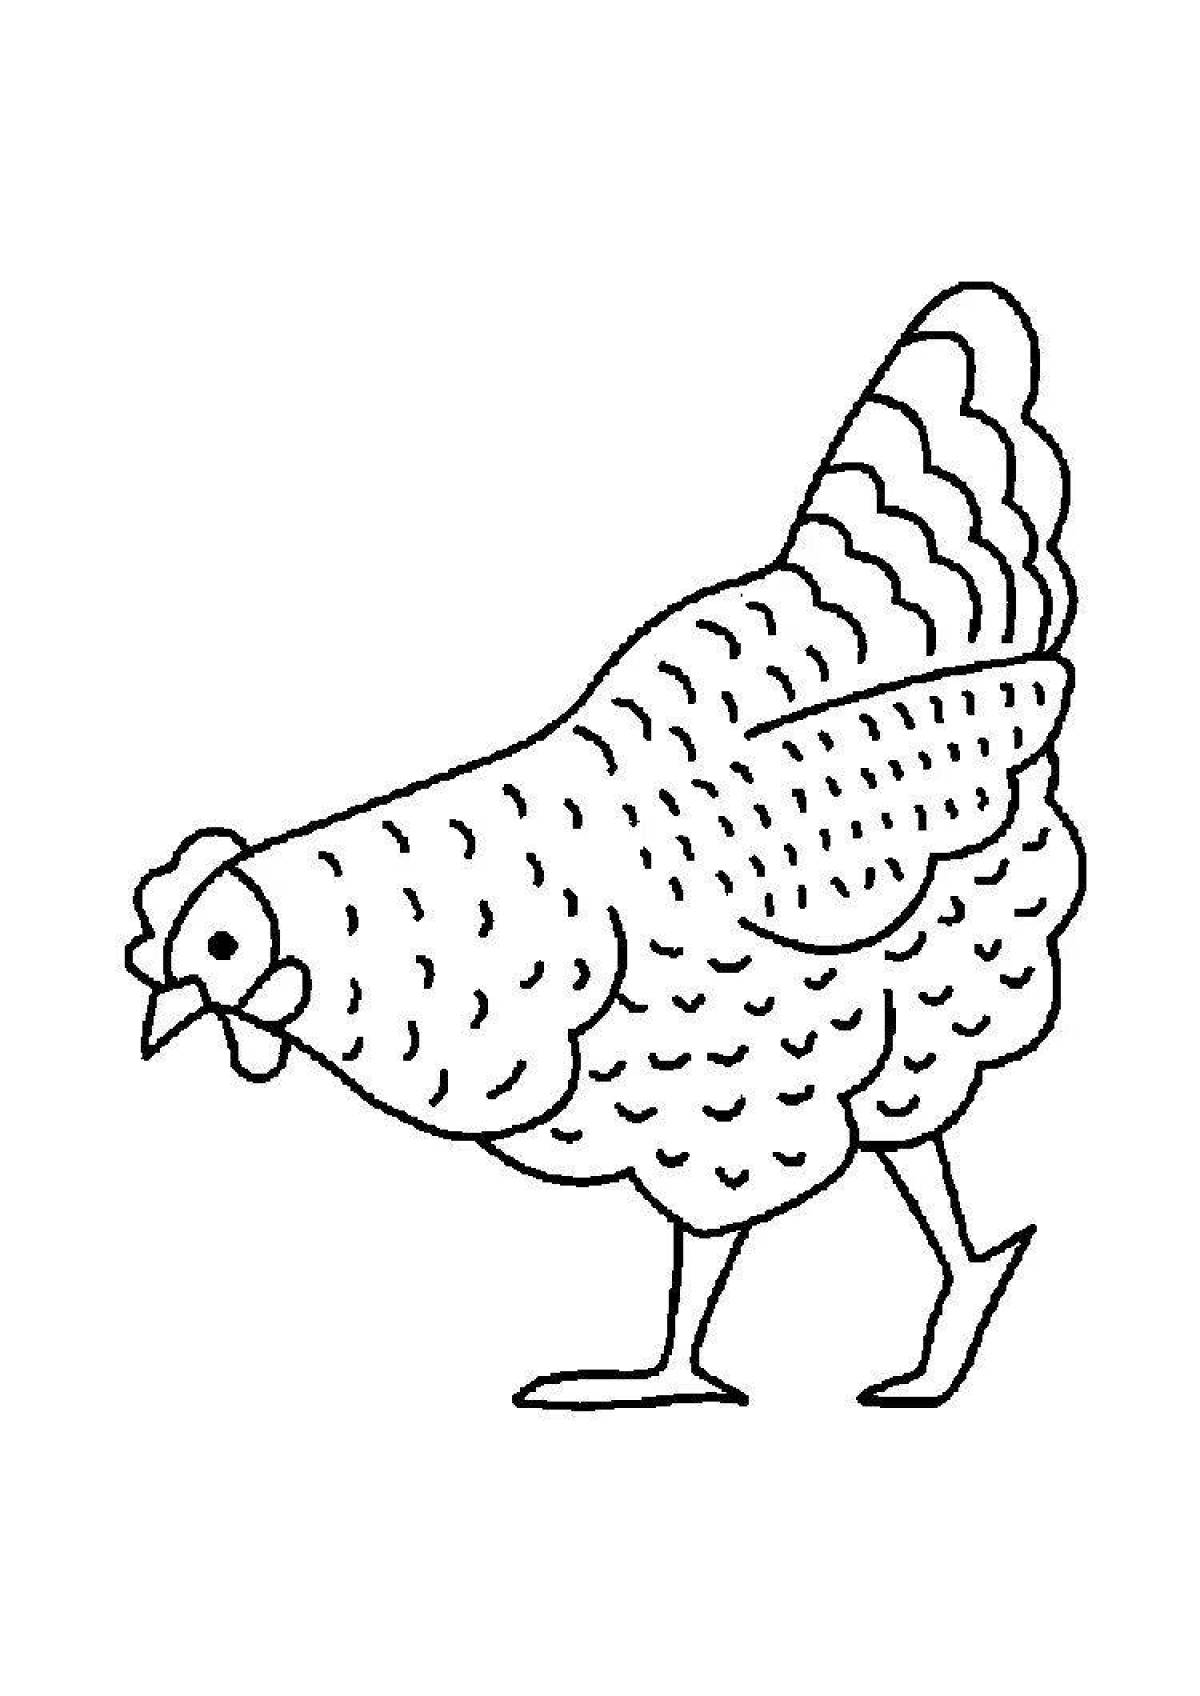 Amazing chick coloring pages for 2-3 year olds